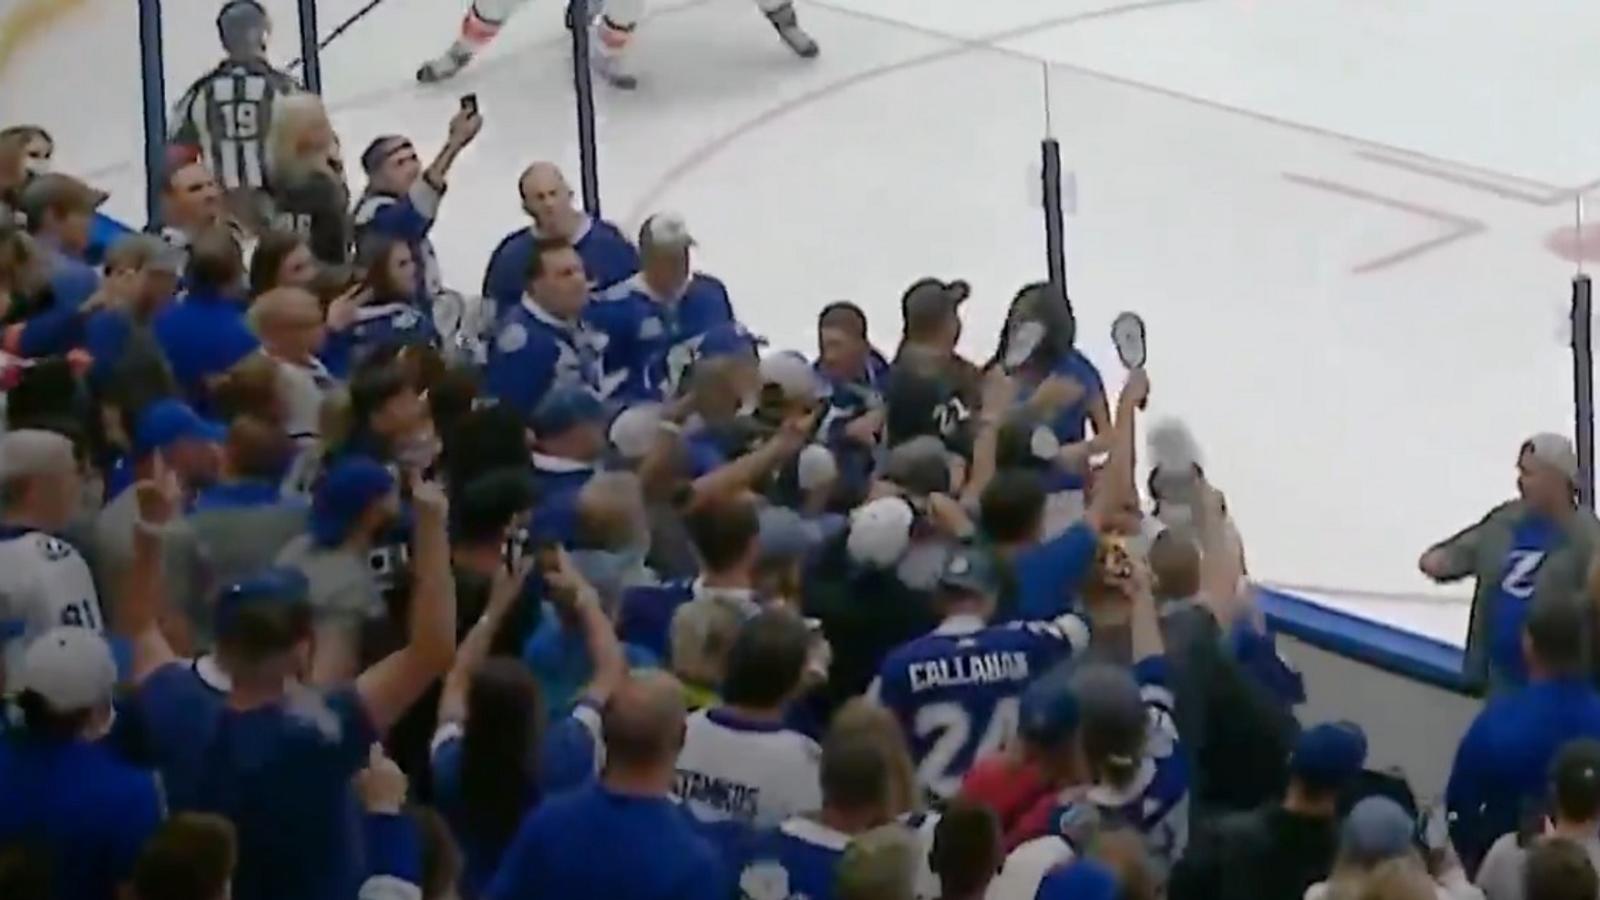 Brawl breaks out between fans in the crowd for Game 7.